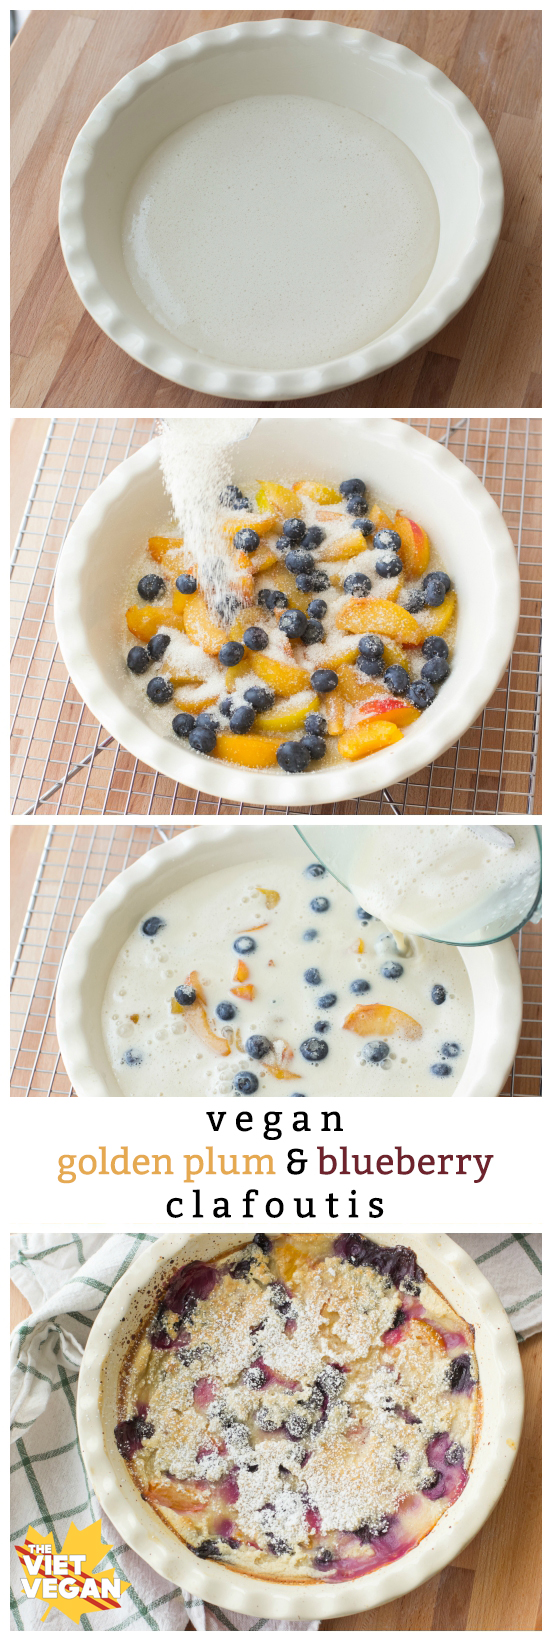 Vegan Golden Plum and Blueberry Clafoutis | The Viet Vegan | Take any of your favourite summer fruits and make this creamy, custardy tart that's a wonderful way to wrap up a summer dinner